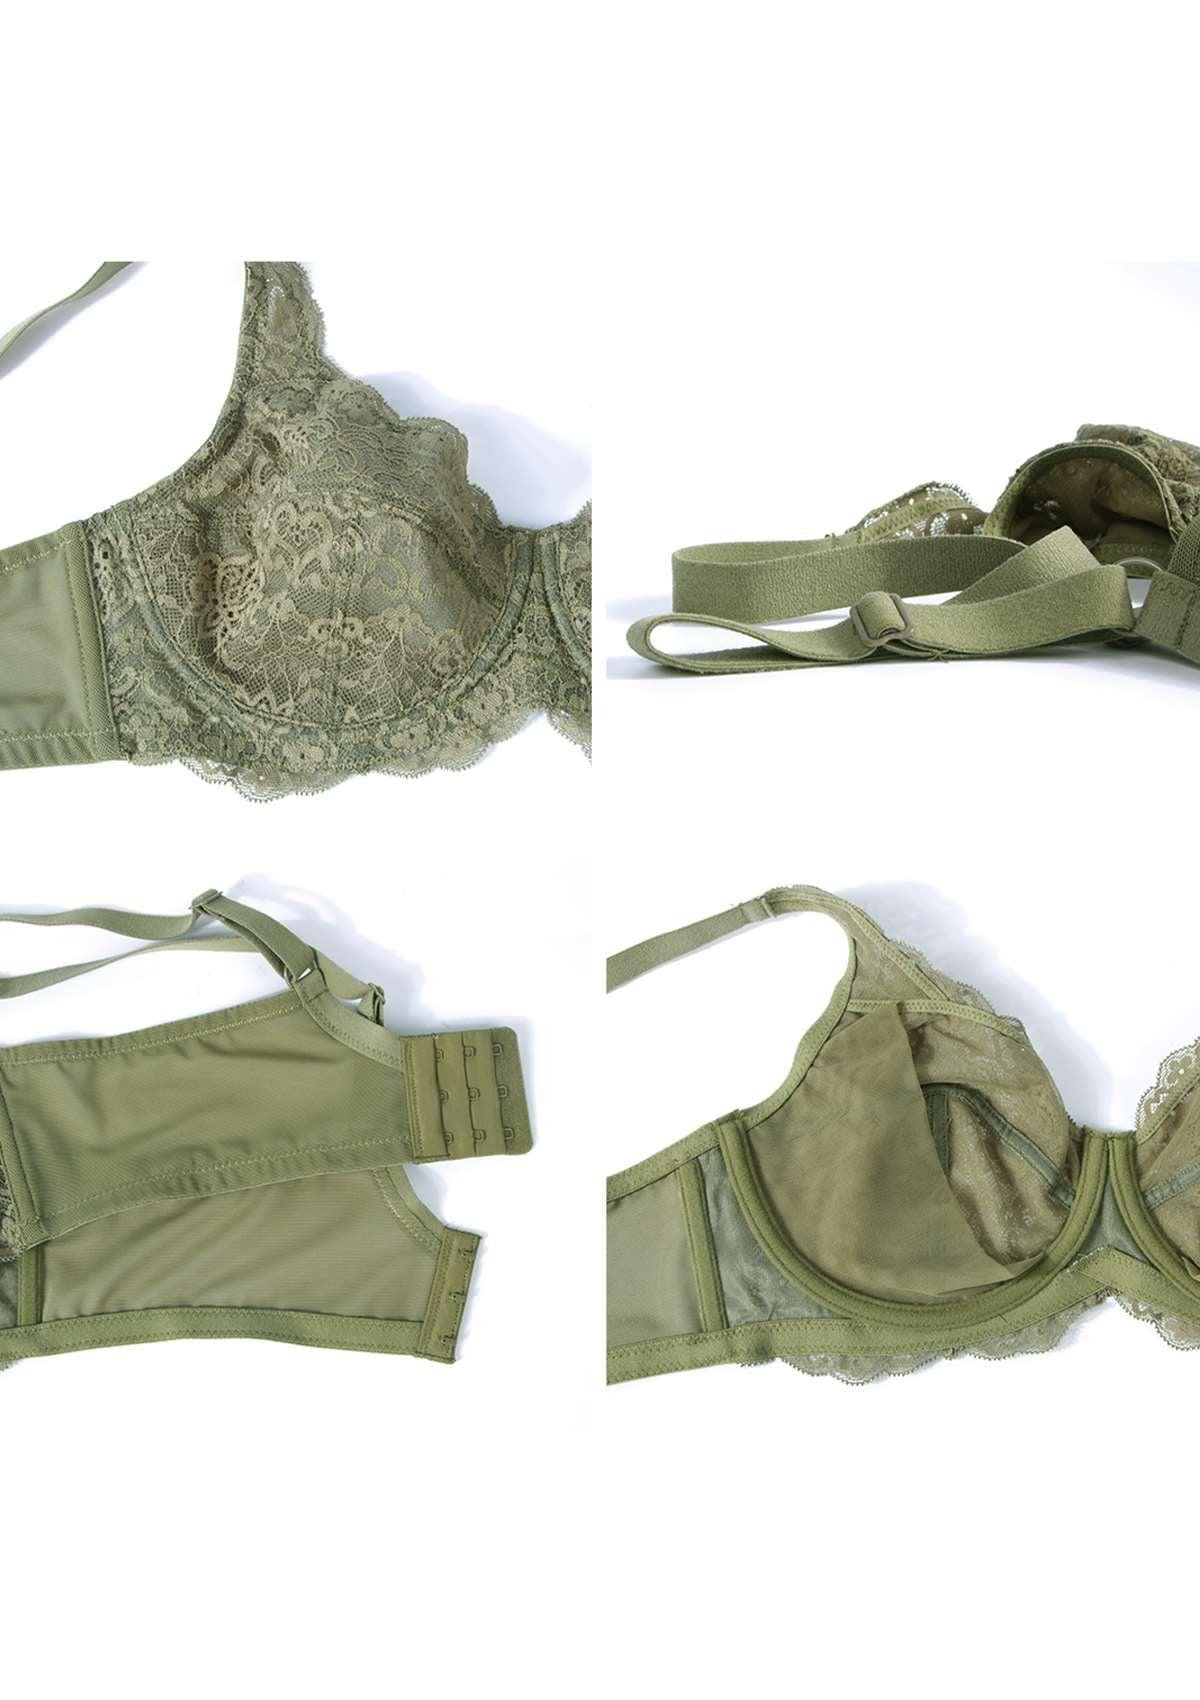 HSIA All-Over Floral Lace Unlined Bra: Minimizer Bra For Heavy Breasts - Dark Green / 42 / DDD/F